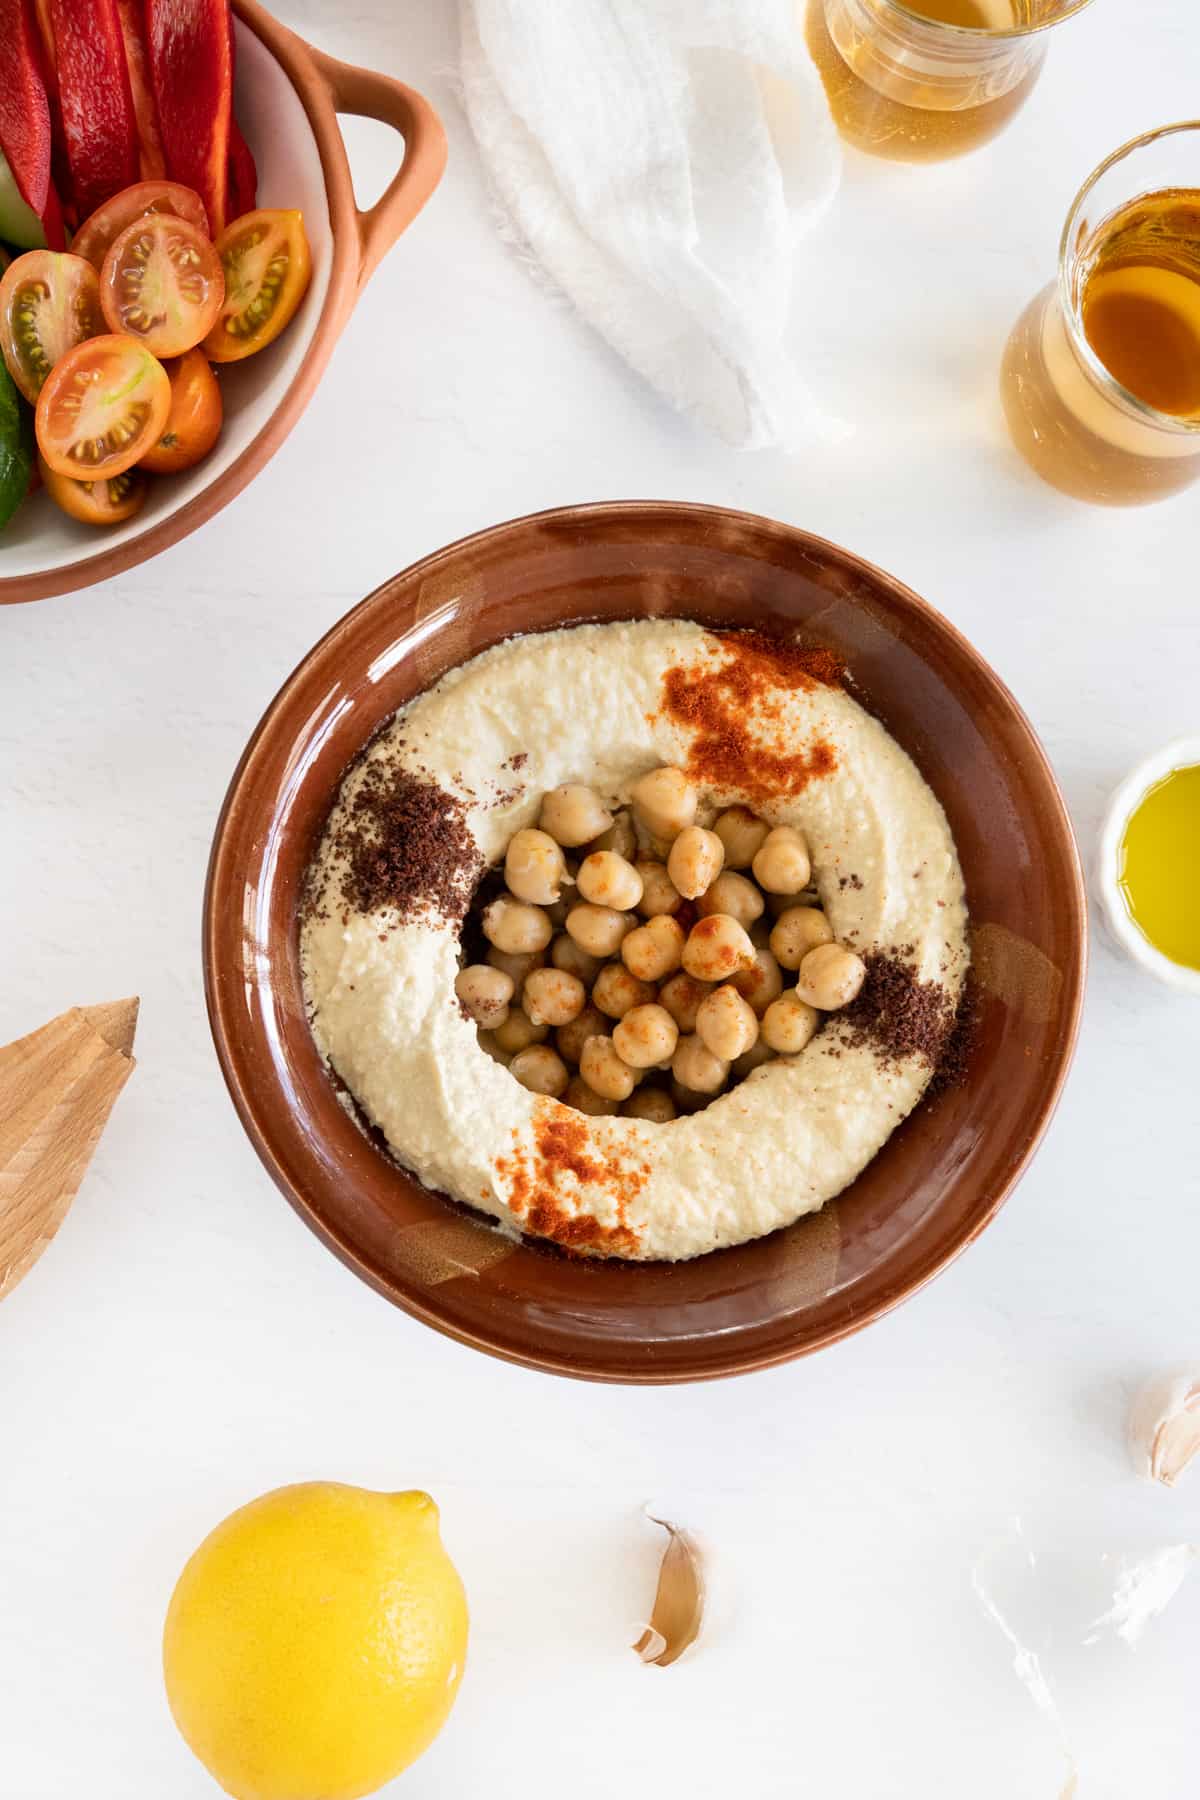 a brown ceramic bowl filled with creamed chickpeas and garnished with red spices